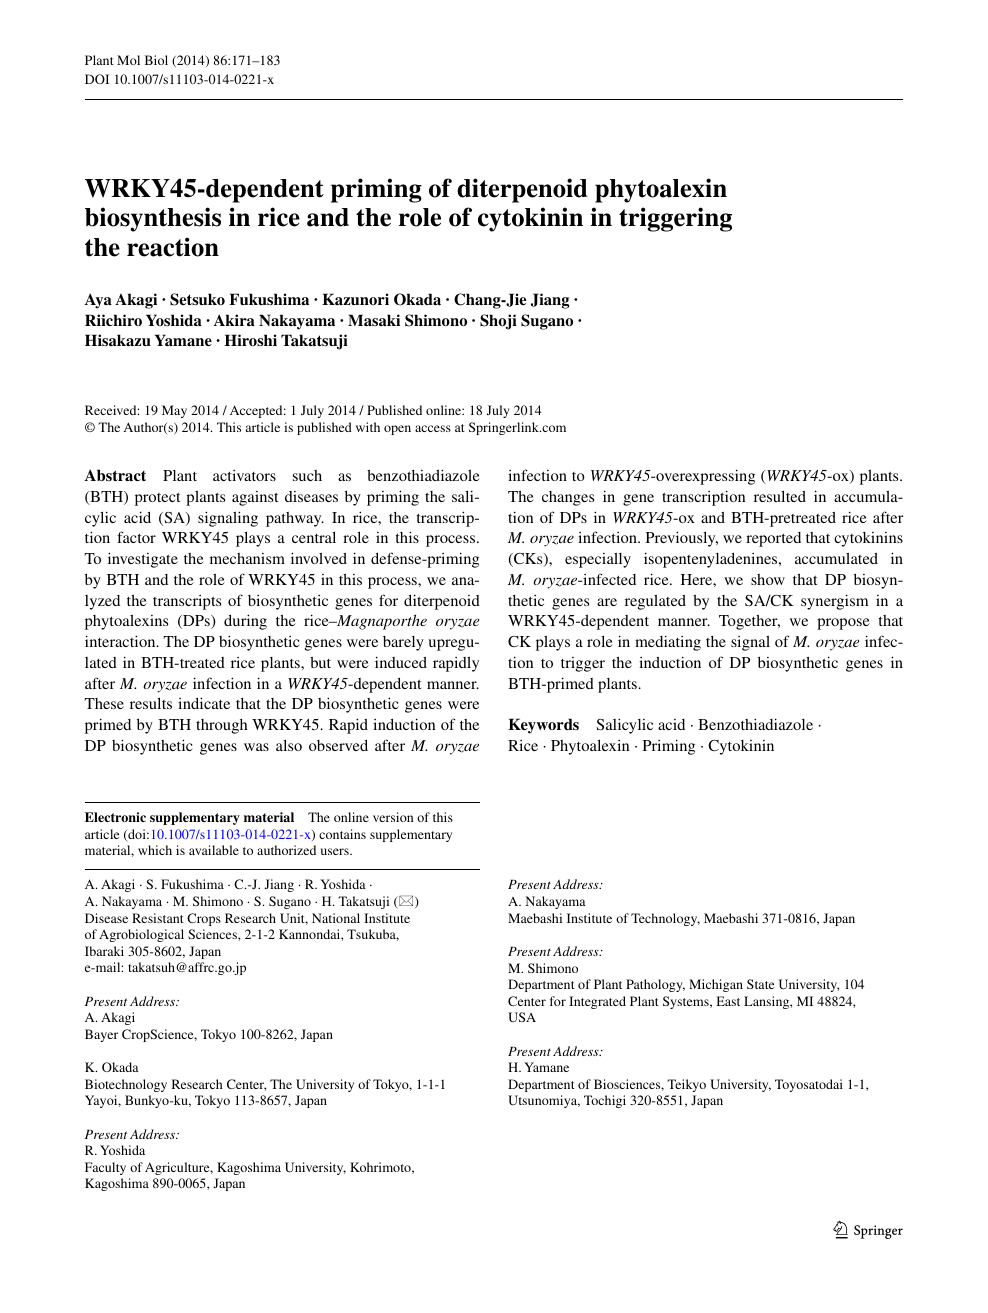 Wrky45 Dependent Priming Of Diterpenoid Phytoalexin Biosynthesis In Rice And The Role Of Cytokinin In Triggering The Reaction Topic Of Research Paper In Biological Sciences Download Scholarly Article Pdf And Read For